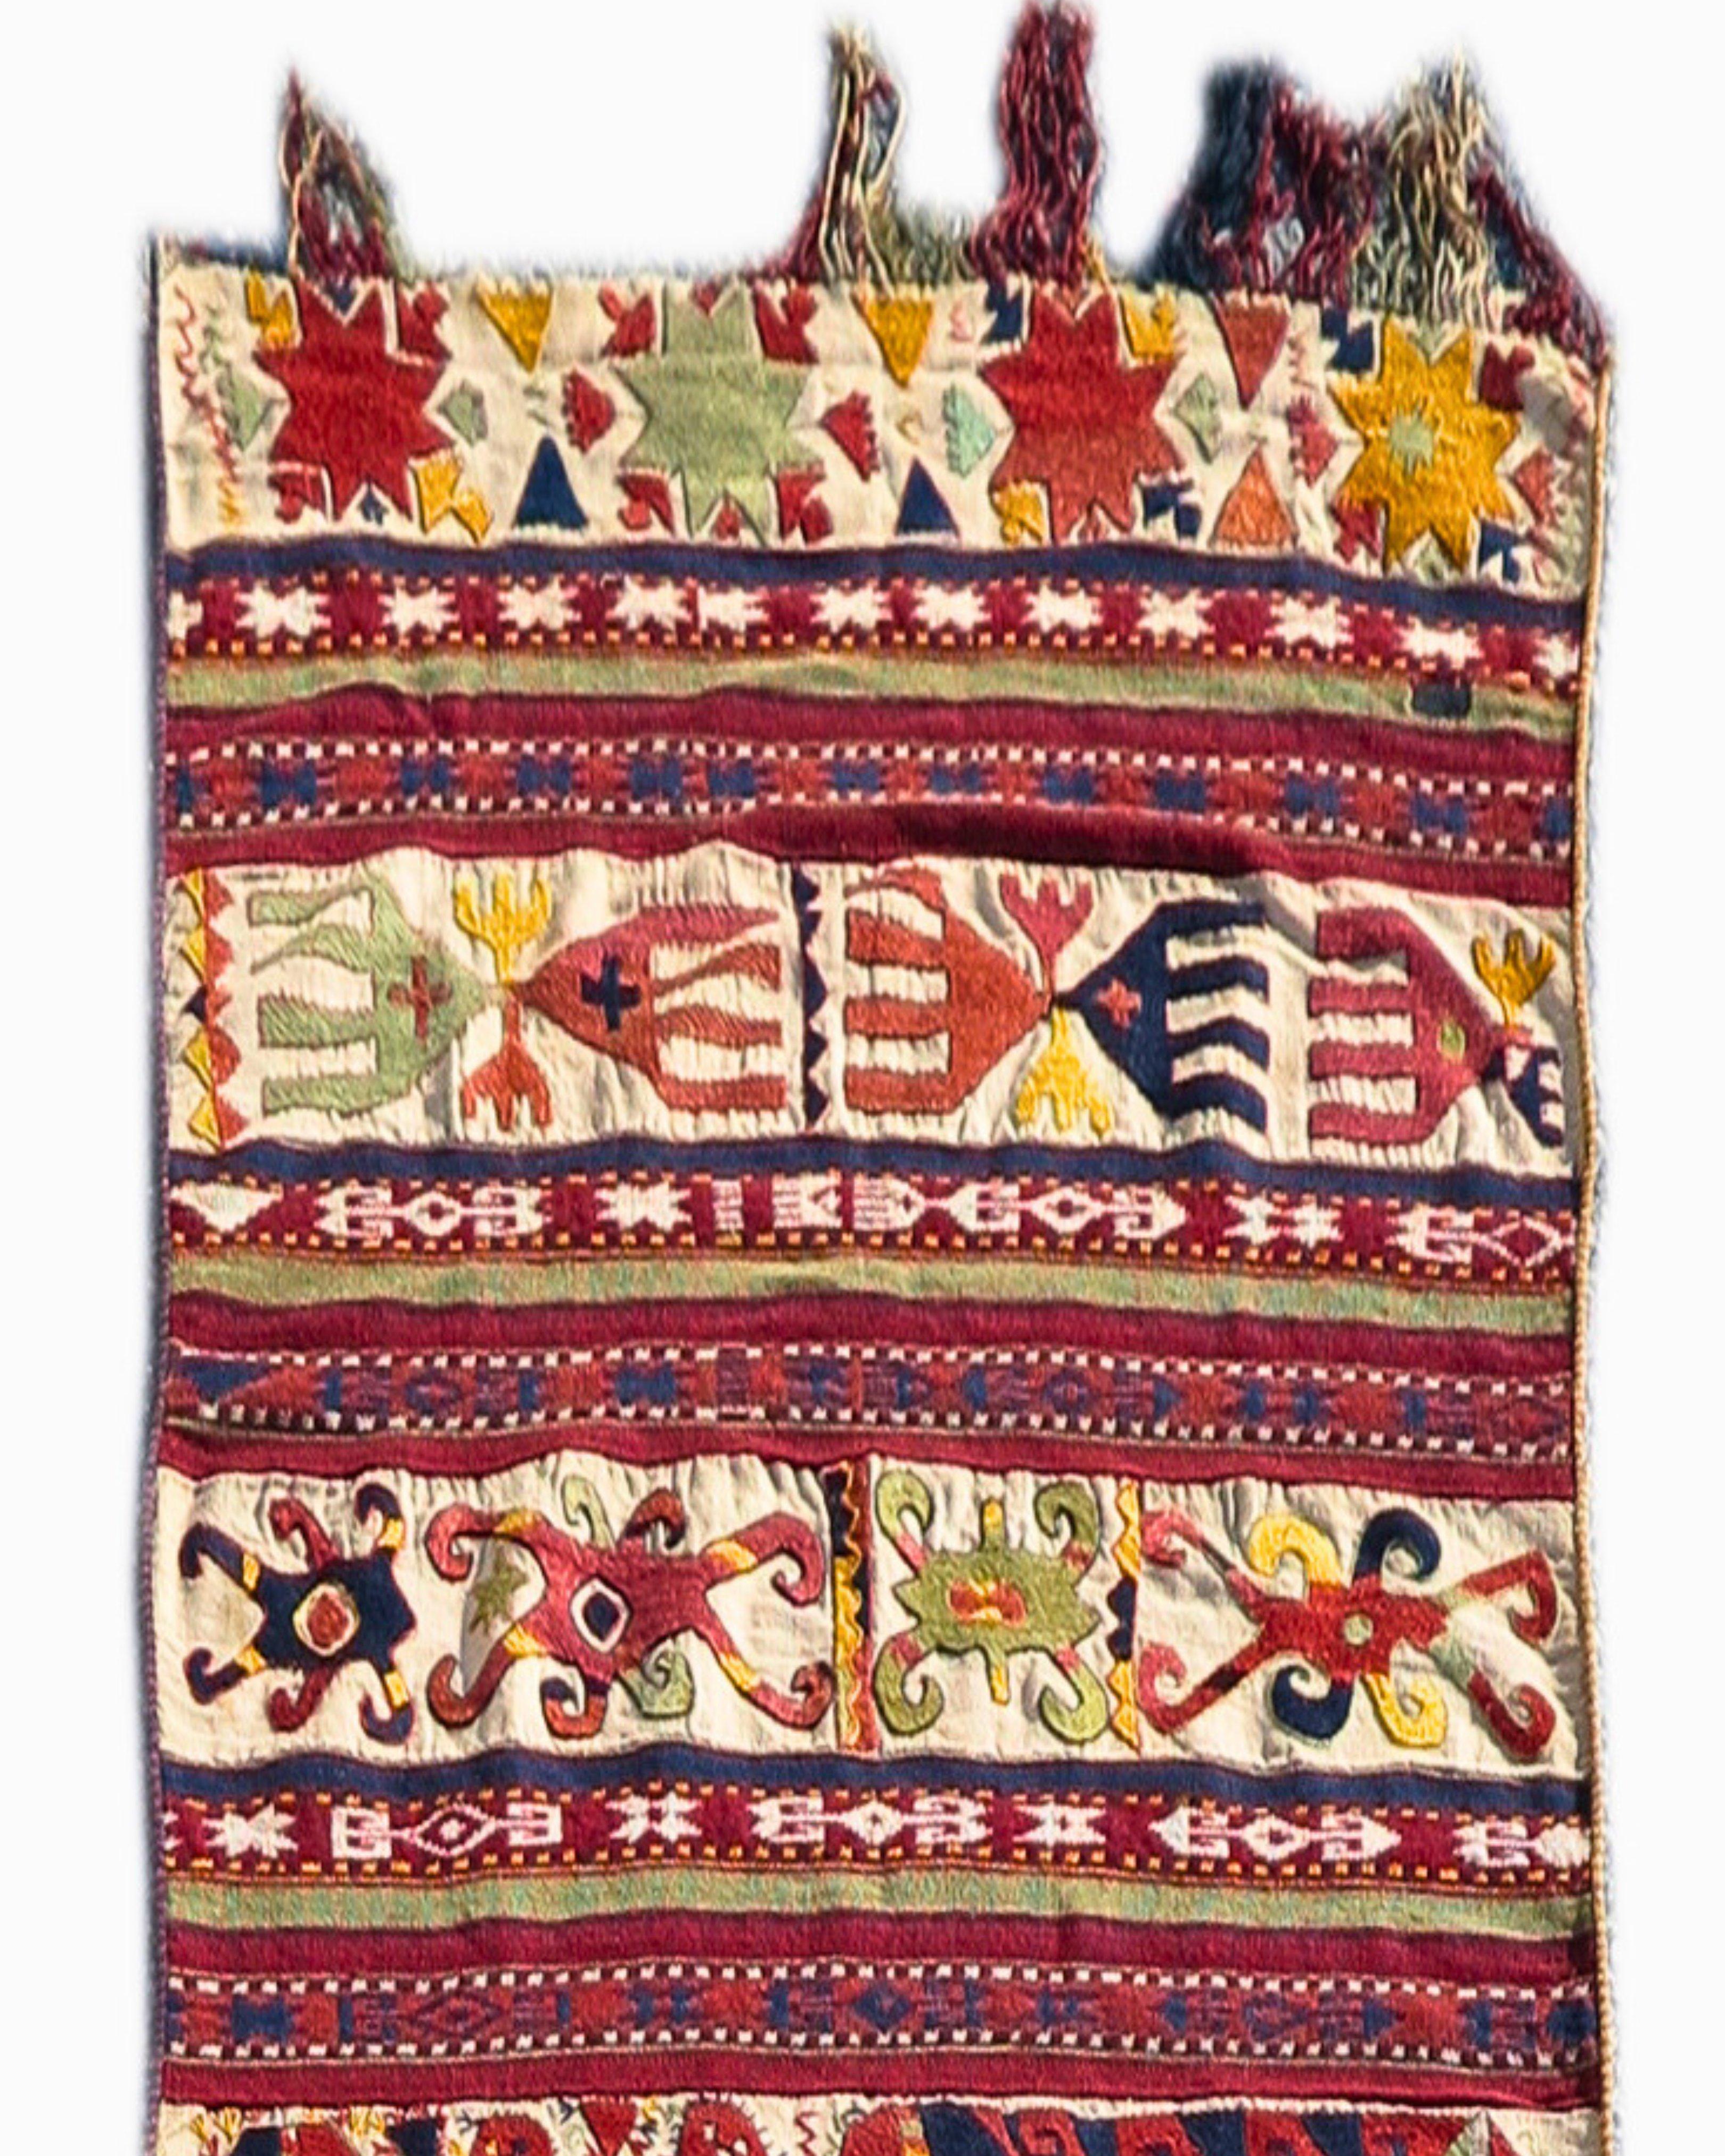 Antique Uzbek Flatweave Rug, Early 20th Century

This long flatweave, composed of large bands of graphically embroidered ornament and narrower portions of weft-float substitution and plain weave, is most likely the work of ethnic Uzbek weavers